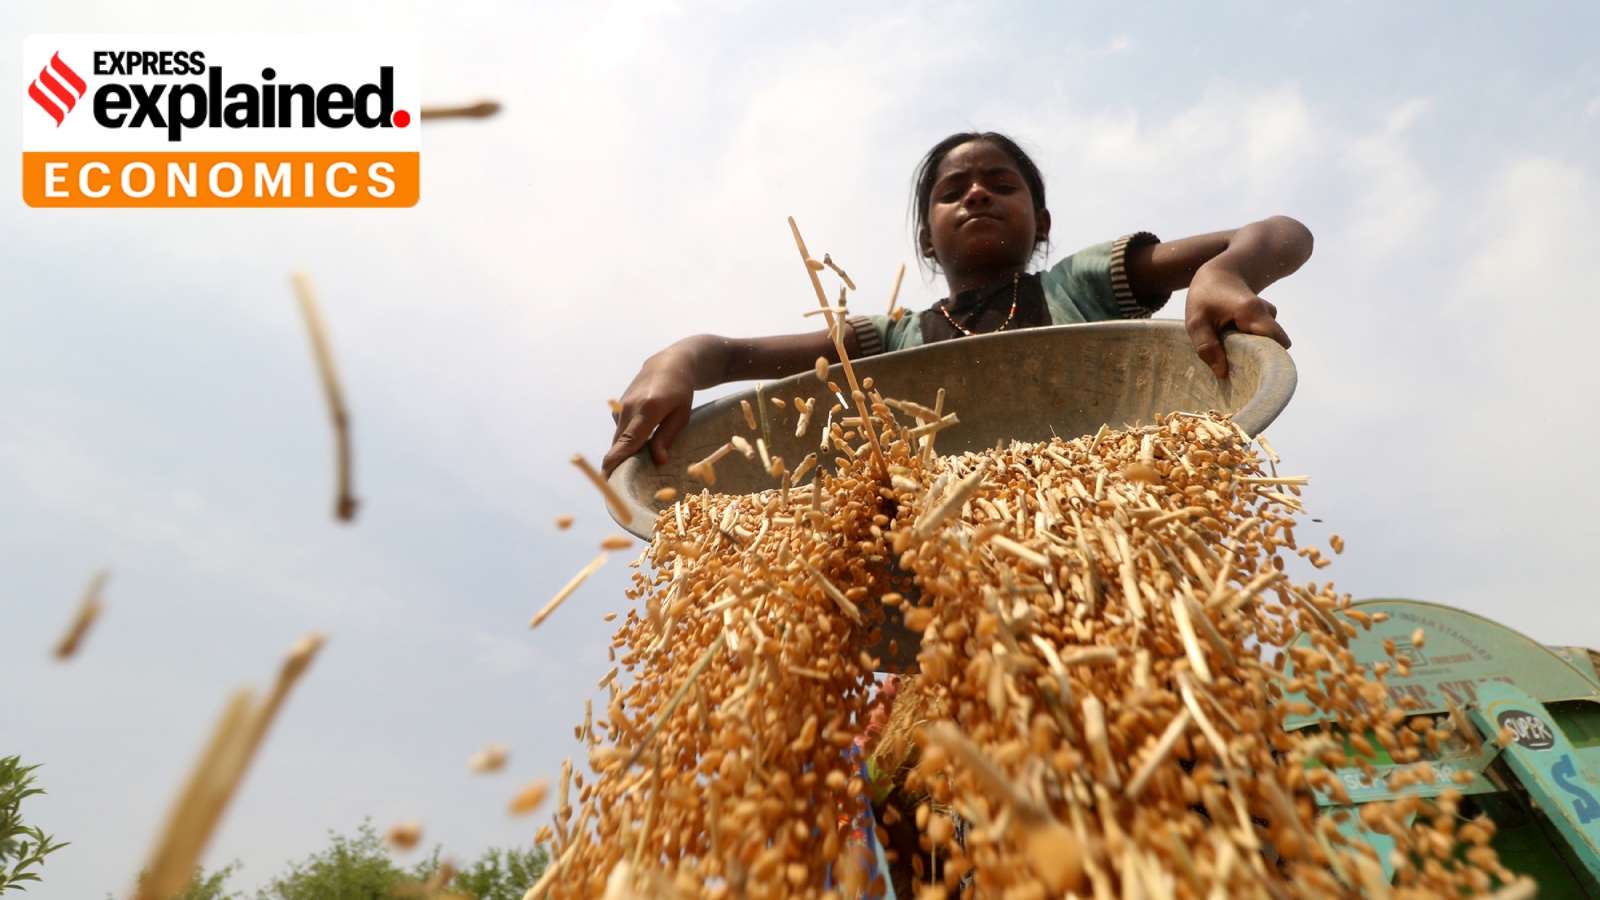 Members of a farm family harvesting wheat crop at the Chitrehta village of Sidhauli in Uttar Pradesh earlier this year.